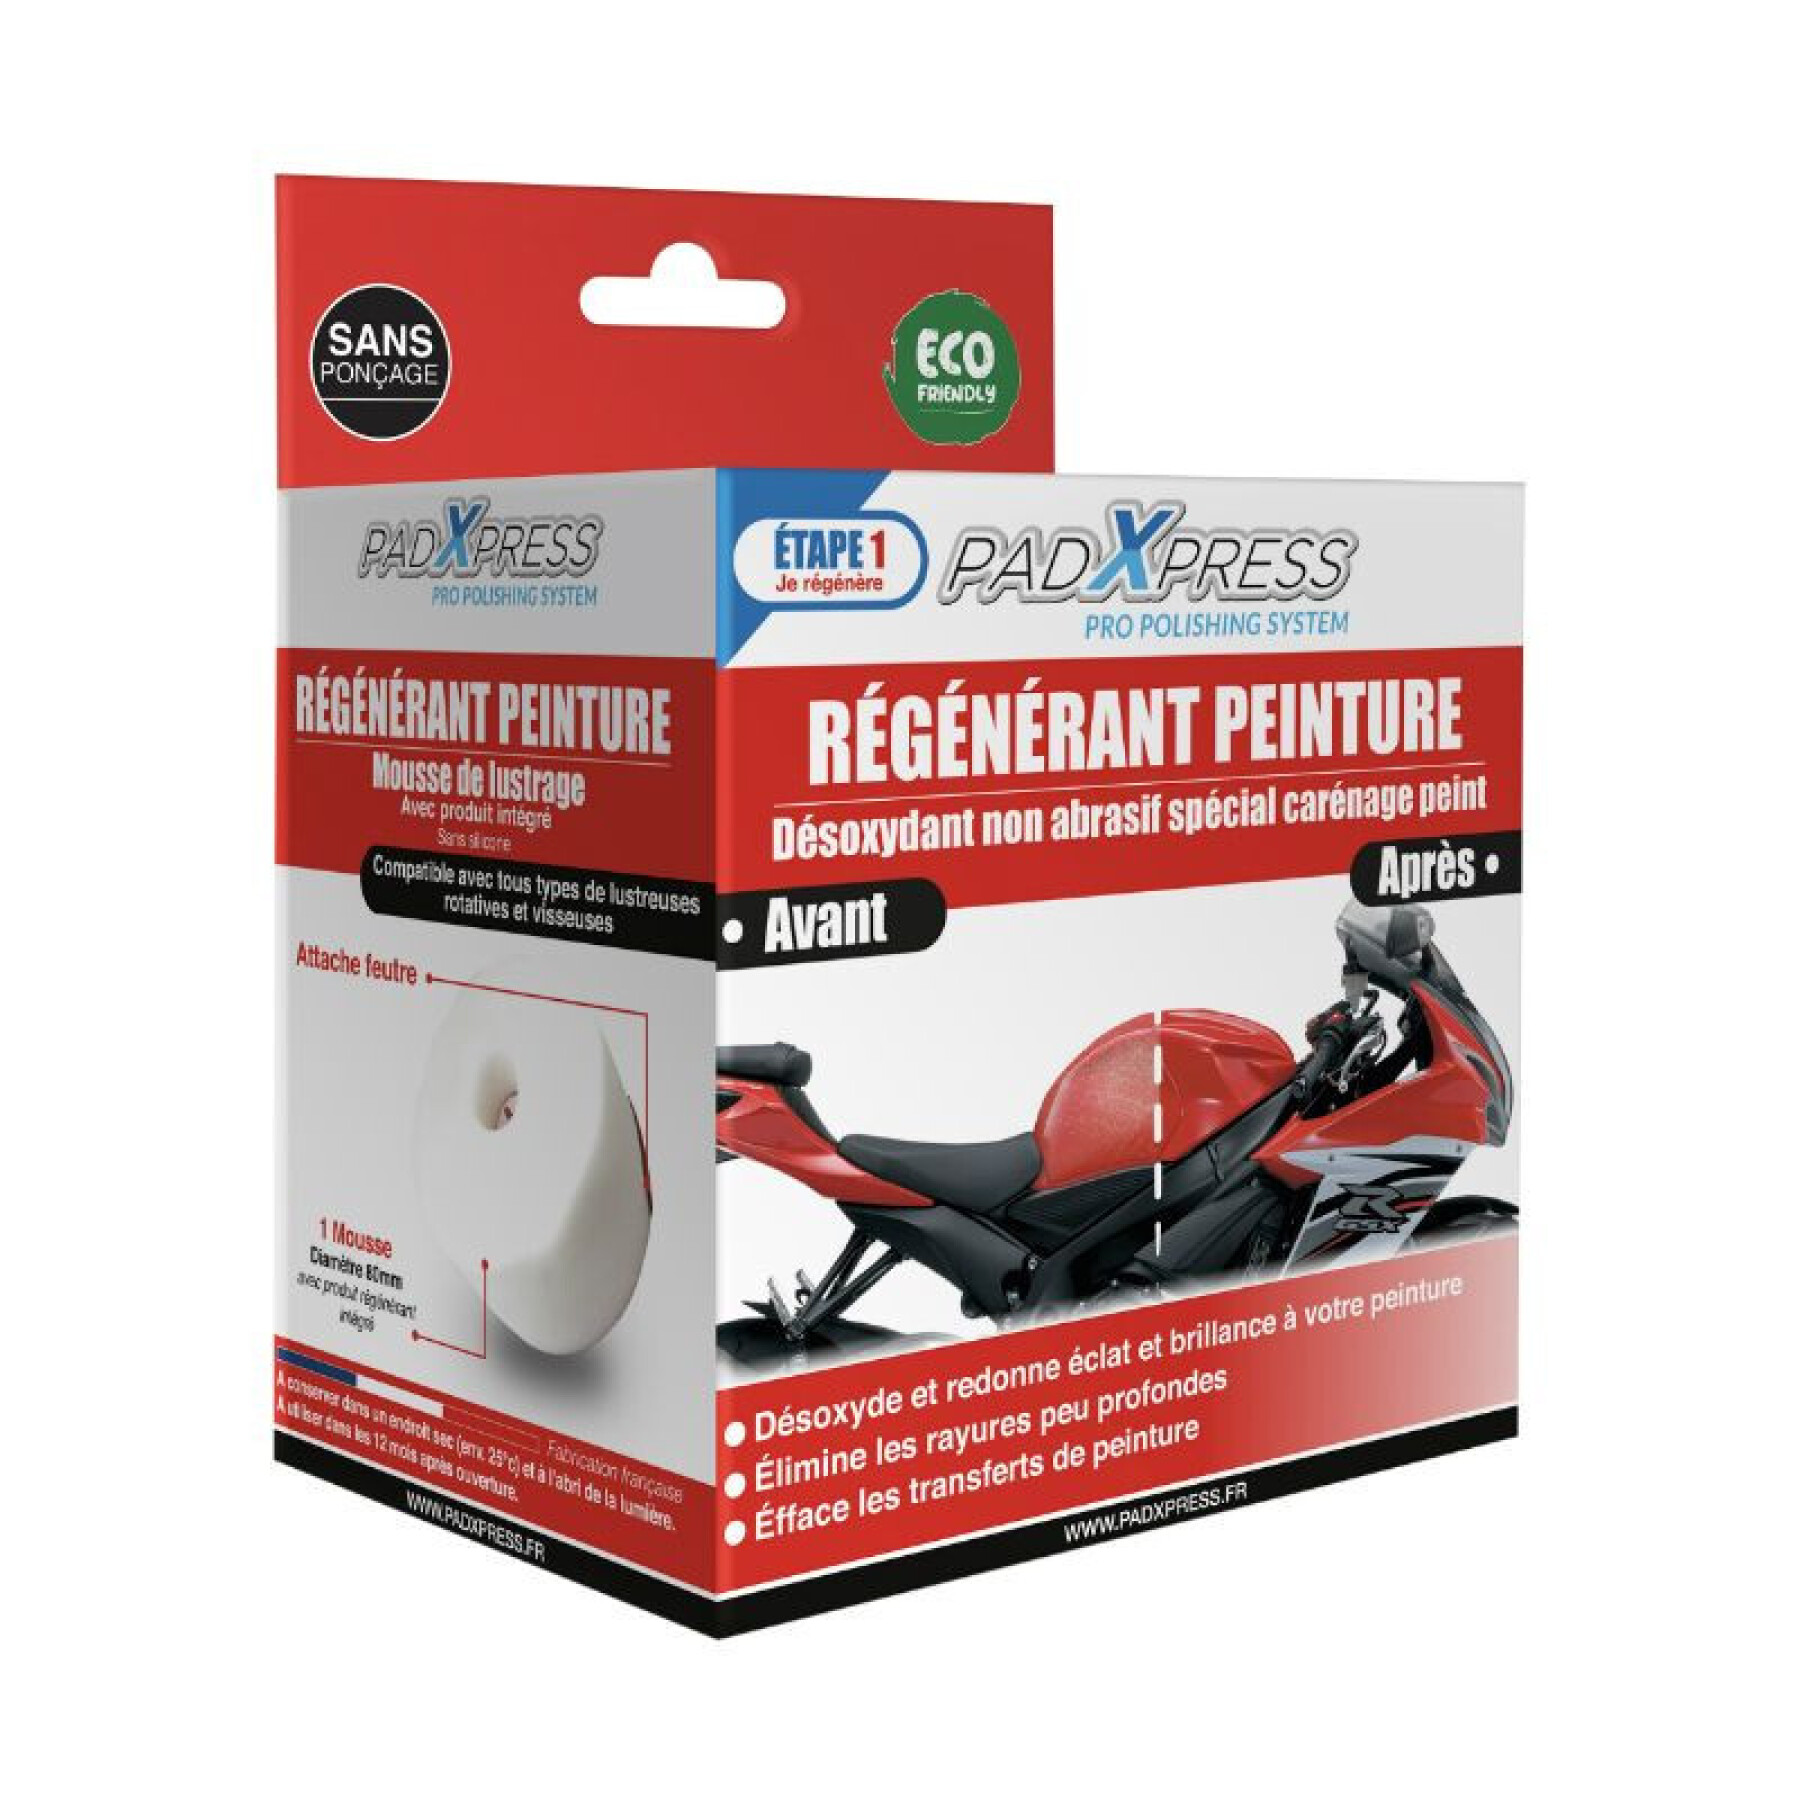 Regenerant motorcycle paint for fairing and tank Mecacyl Padxpress